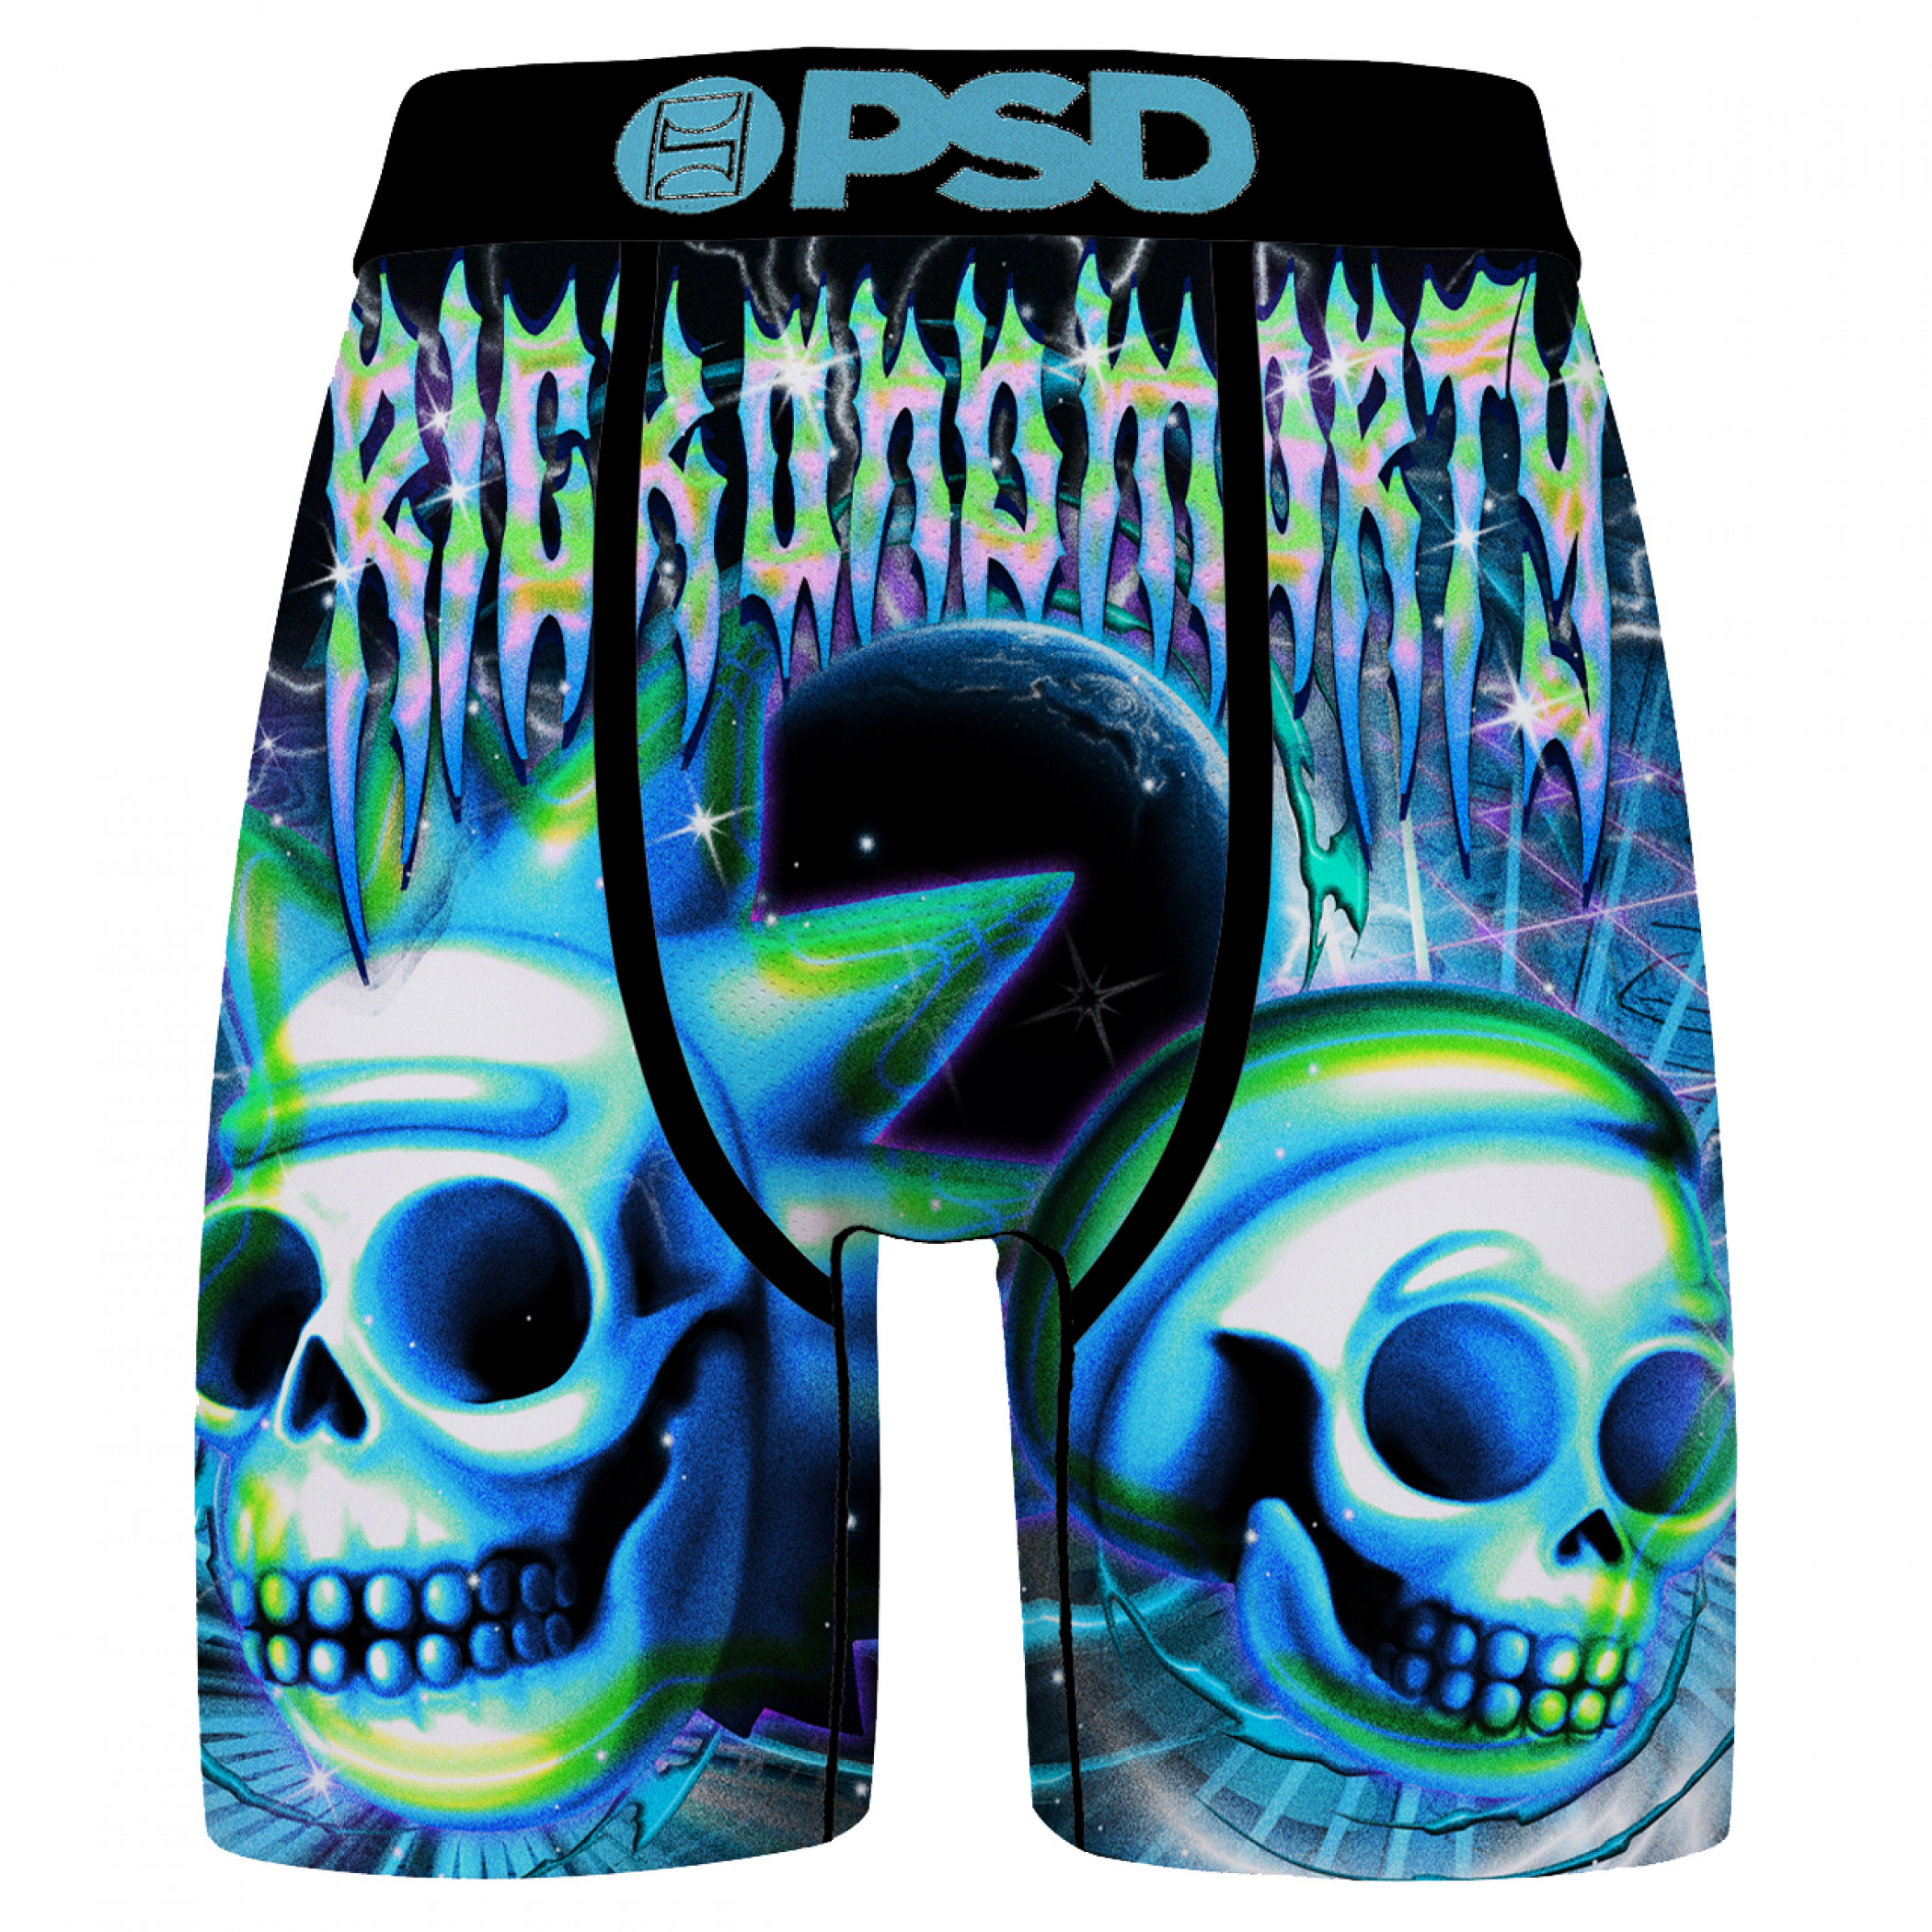 Rick and Morty Wash Scene Men's PSD Boxer Briefs-XLarge (40-42)